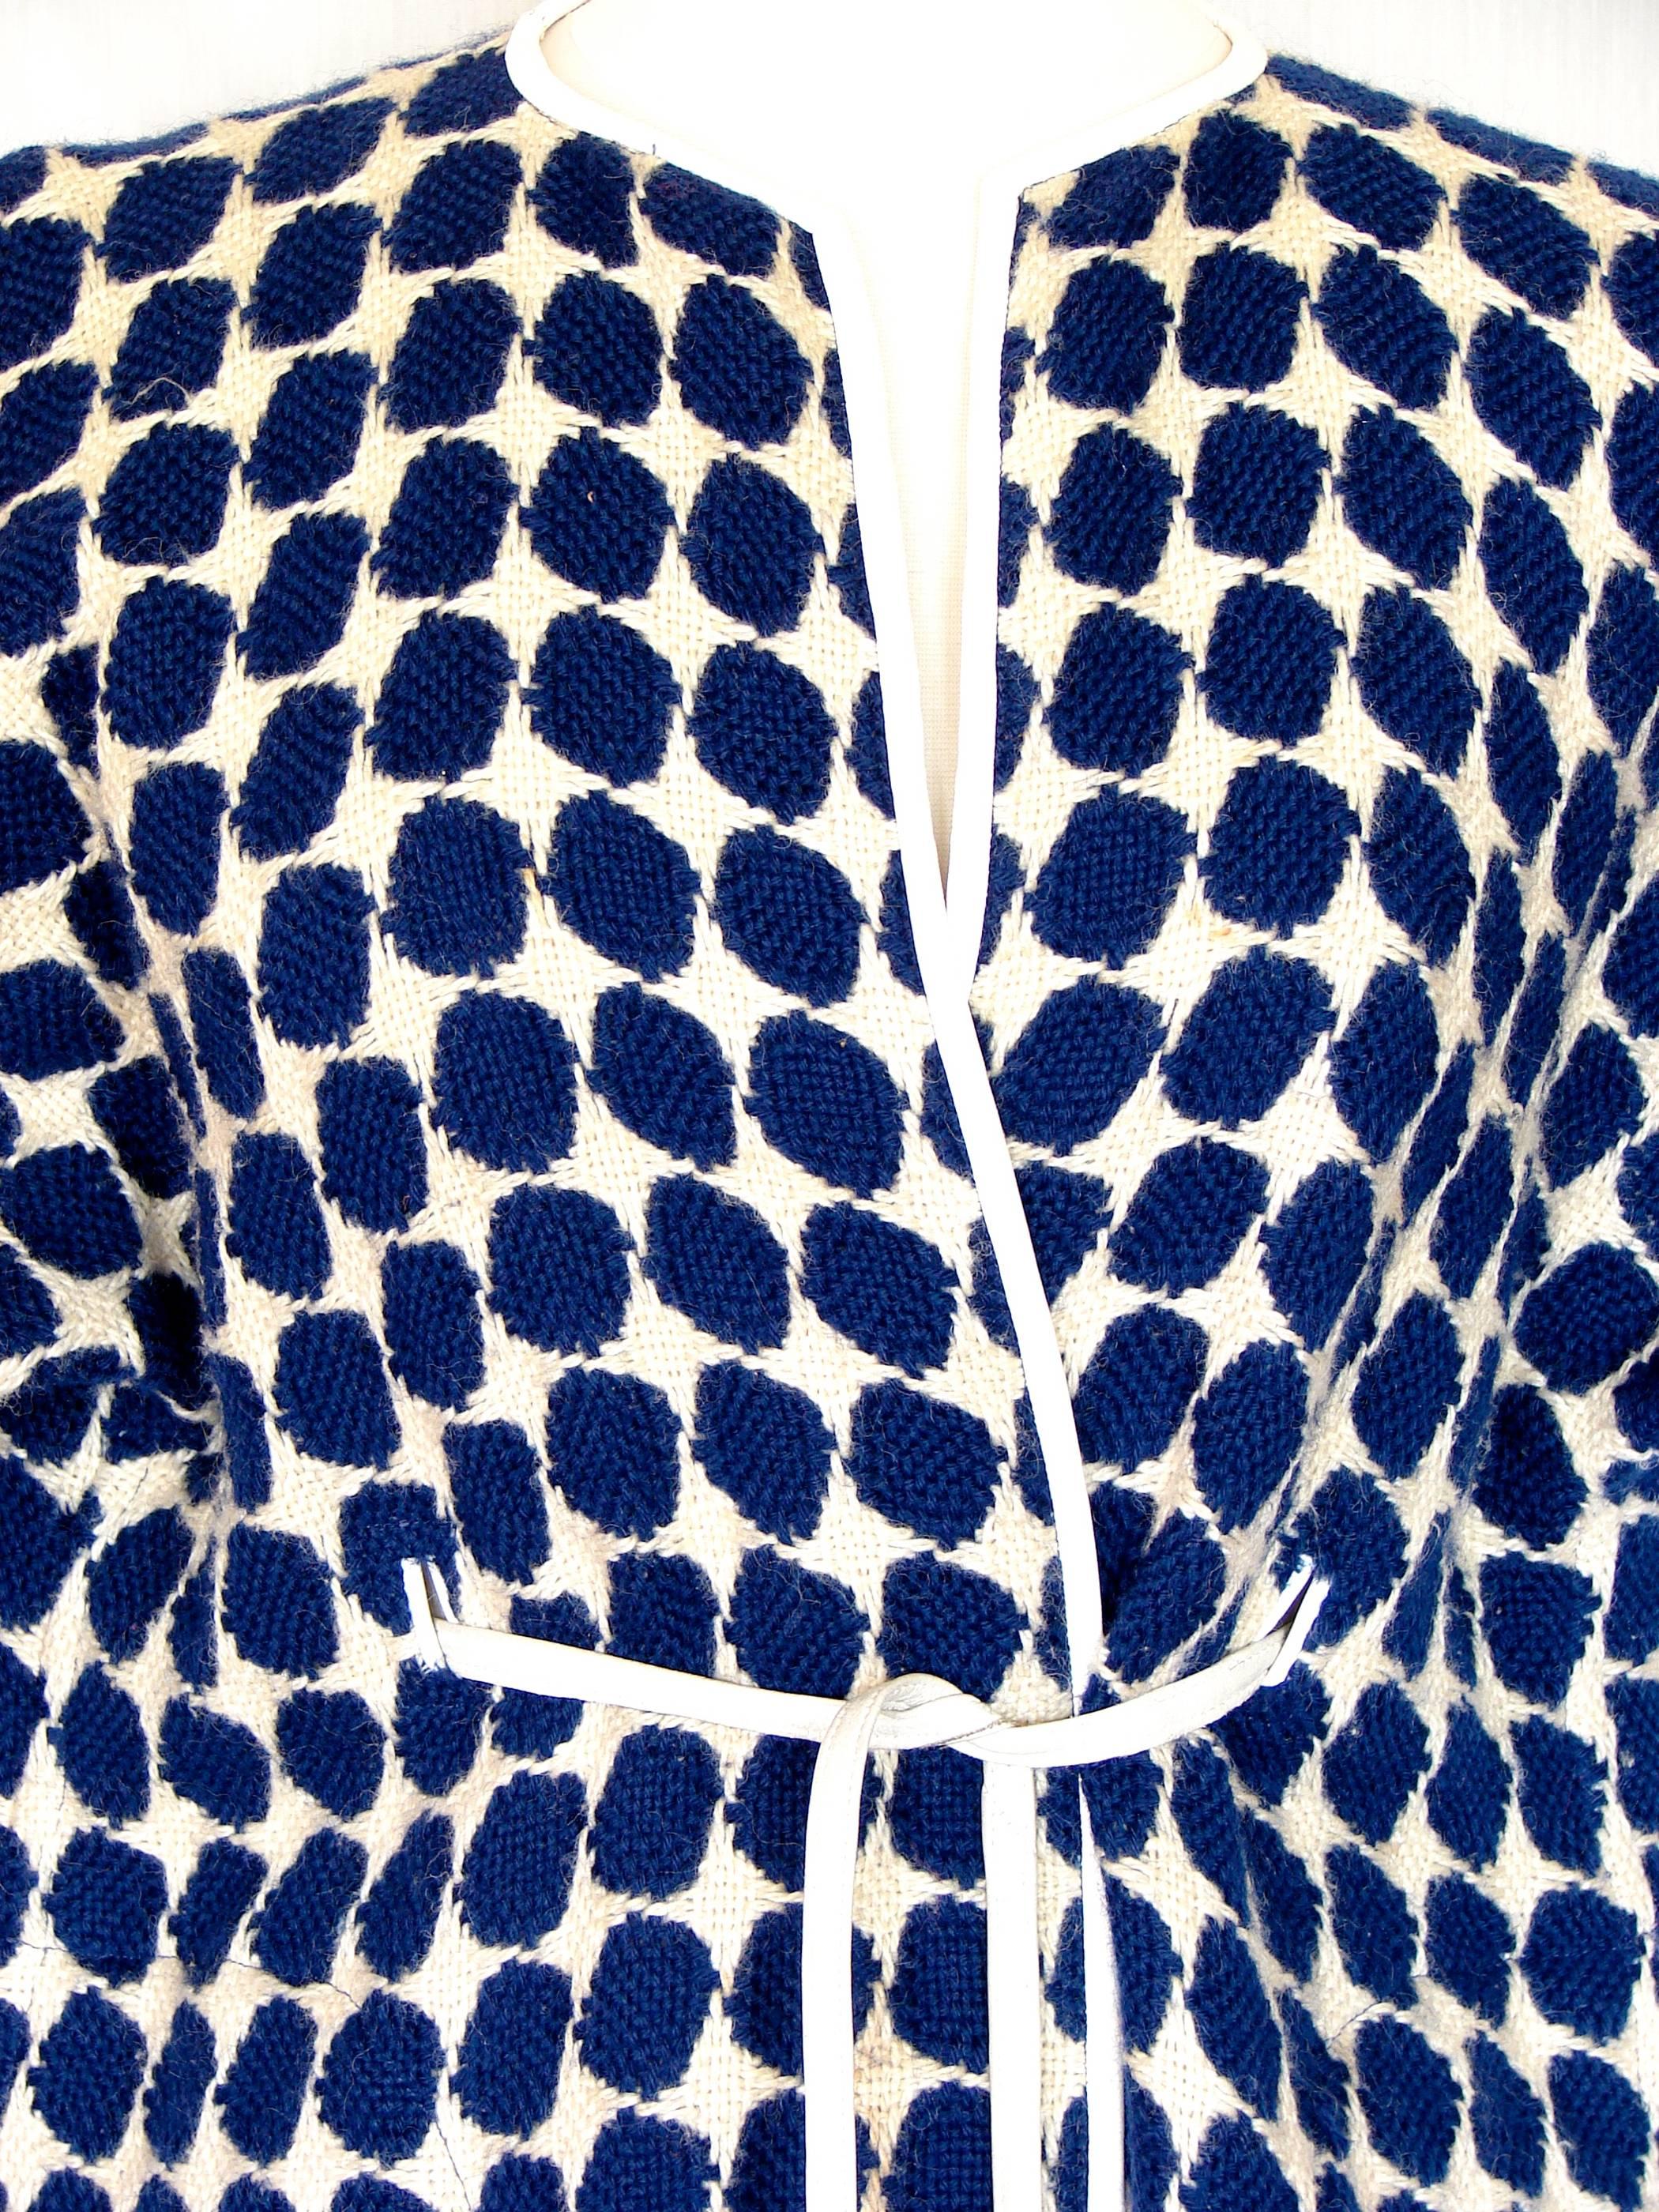 Incredibly rare Op Art wool and leather coat from the mother of American Sportswear, Bonnie Cashin.  This is her NOH style coat, inspired by her travels to Asia, and designed for layering.  Unlined and in excellent condition, we note some minor wear